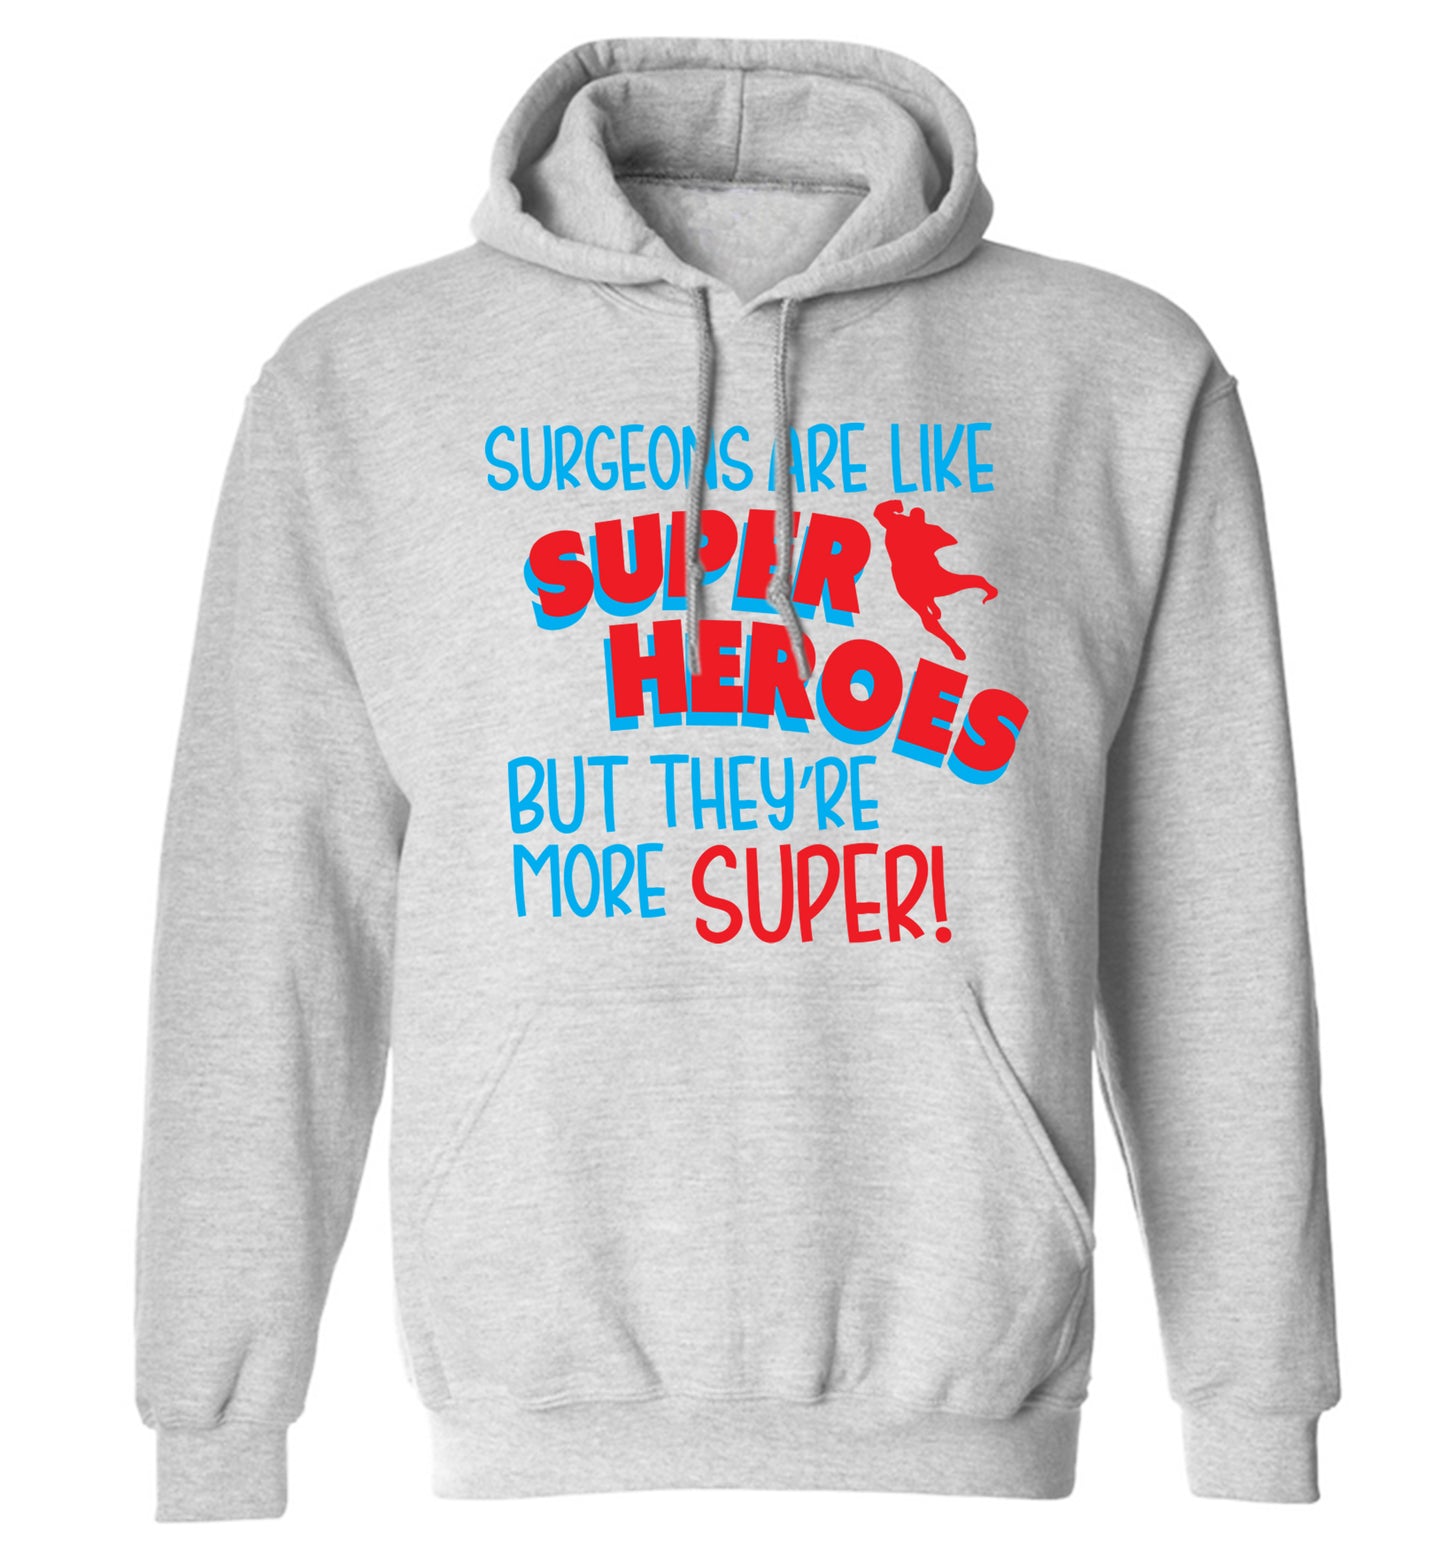 Surgeons are like superheros but they're more super adults unisex grey hoodie 2XL